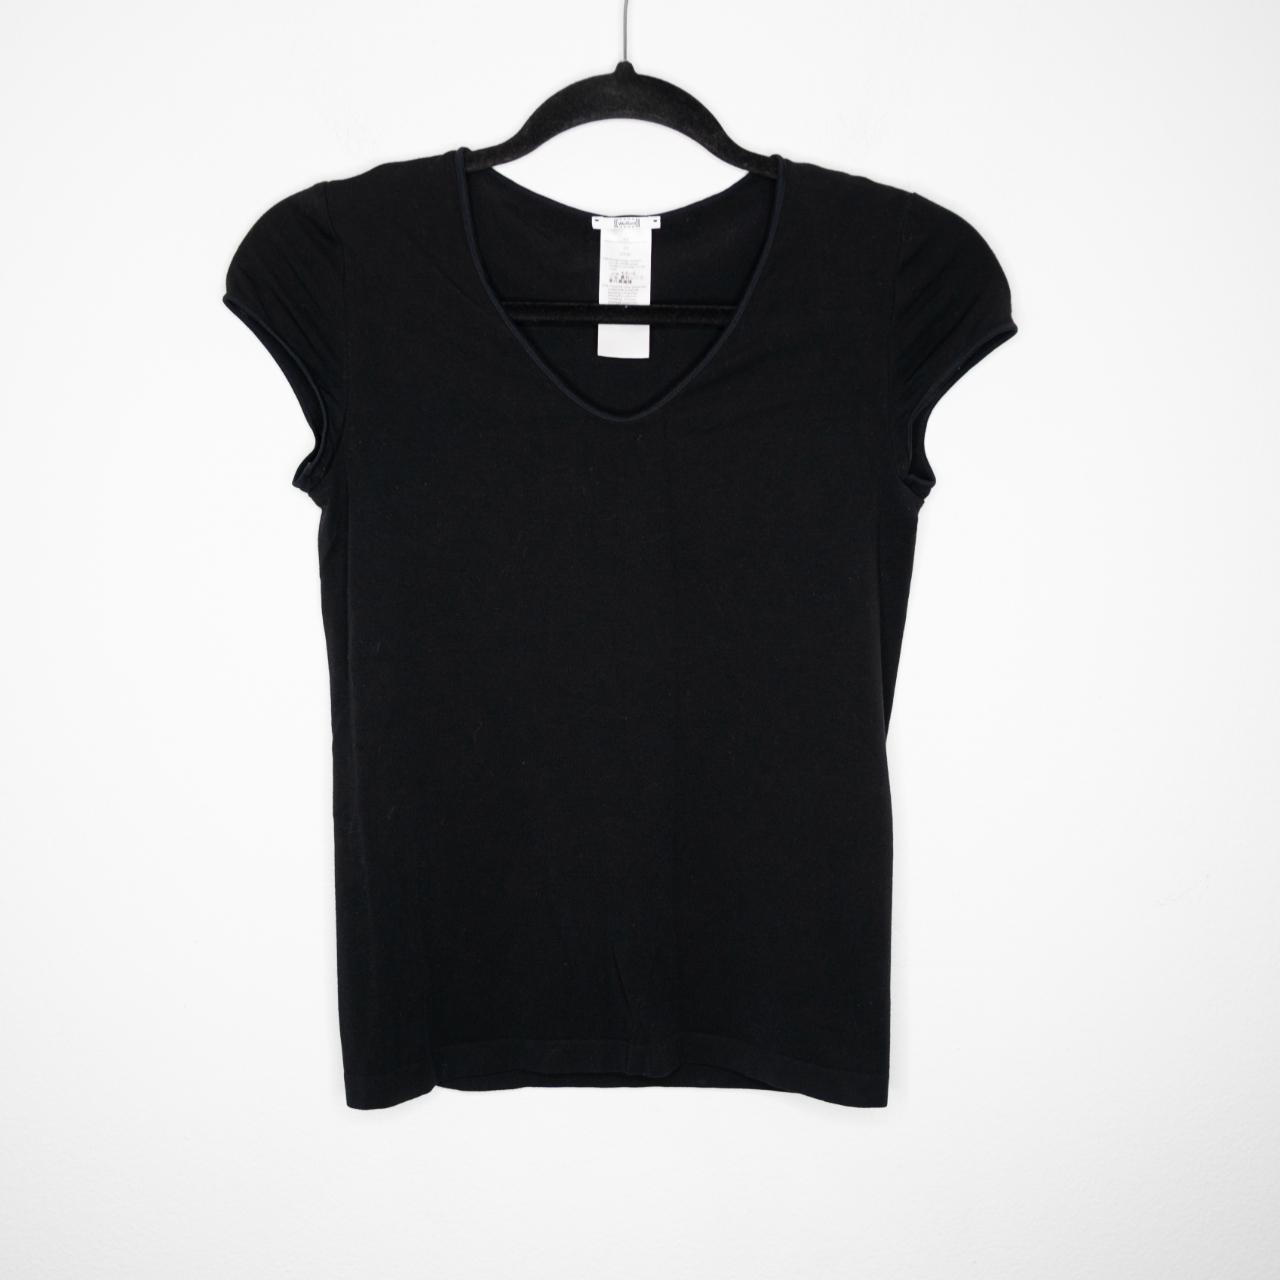 Product Image 1 - Honolulu top from Wolford in